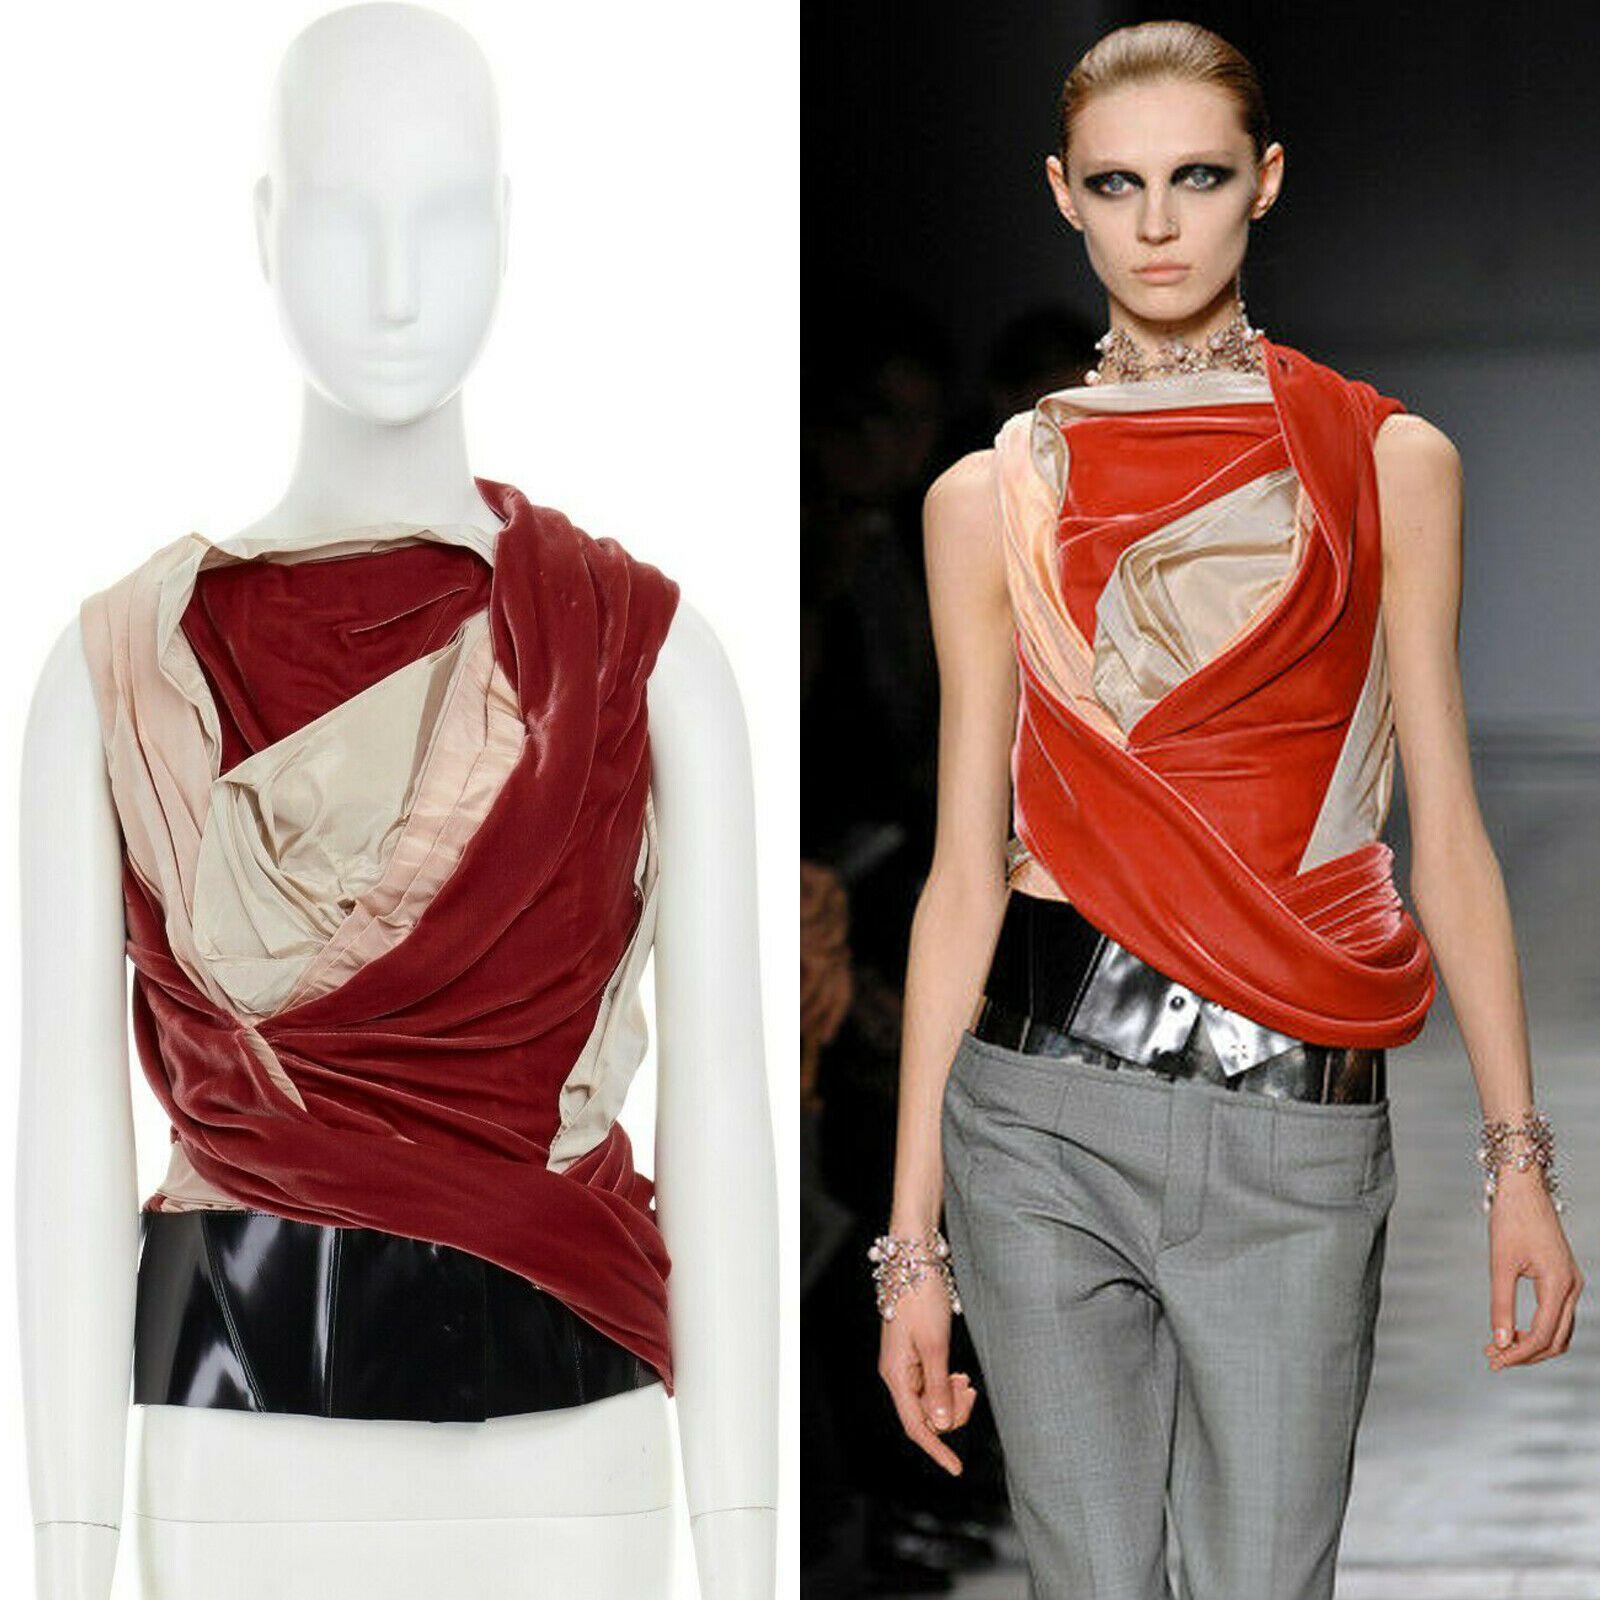 runway BALENCIAGA GHESQUIERE AW08 red draped velvet corset top FR38 US6 UK10

BALENCIAGA by NICHOLAS GHESQUIERE
FROM THE FALL WINTER 2008 RUNWAYAS 
SEEN ON: BLUE SEEN ON KEIRA KNIGHTLY ON AMERICAN VOGUE SEPTEMBER ISSUE COVERVISCOSE, RAYON, SILK .